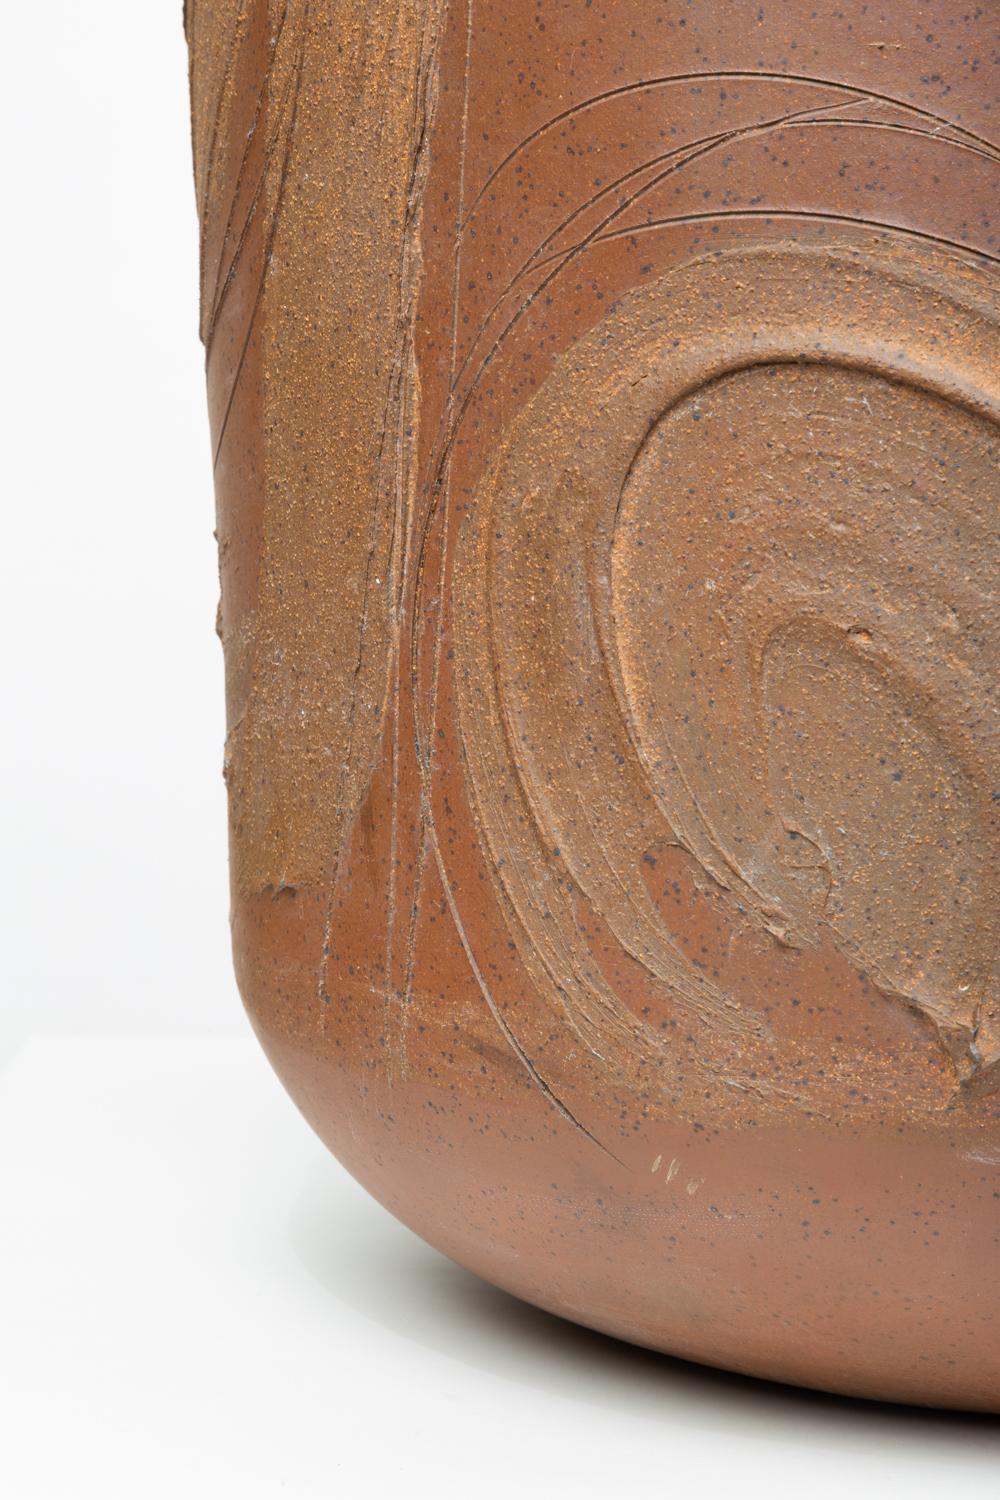 Stoneware Pro/Artisan “Expressive” Planter by David Cressey for Architectural Pottery